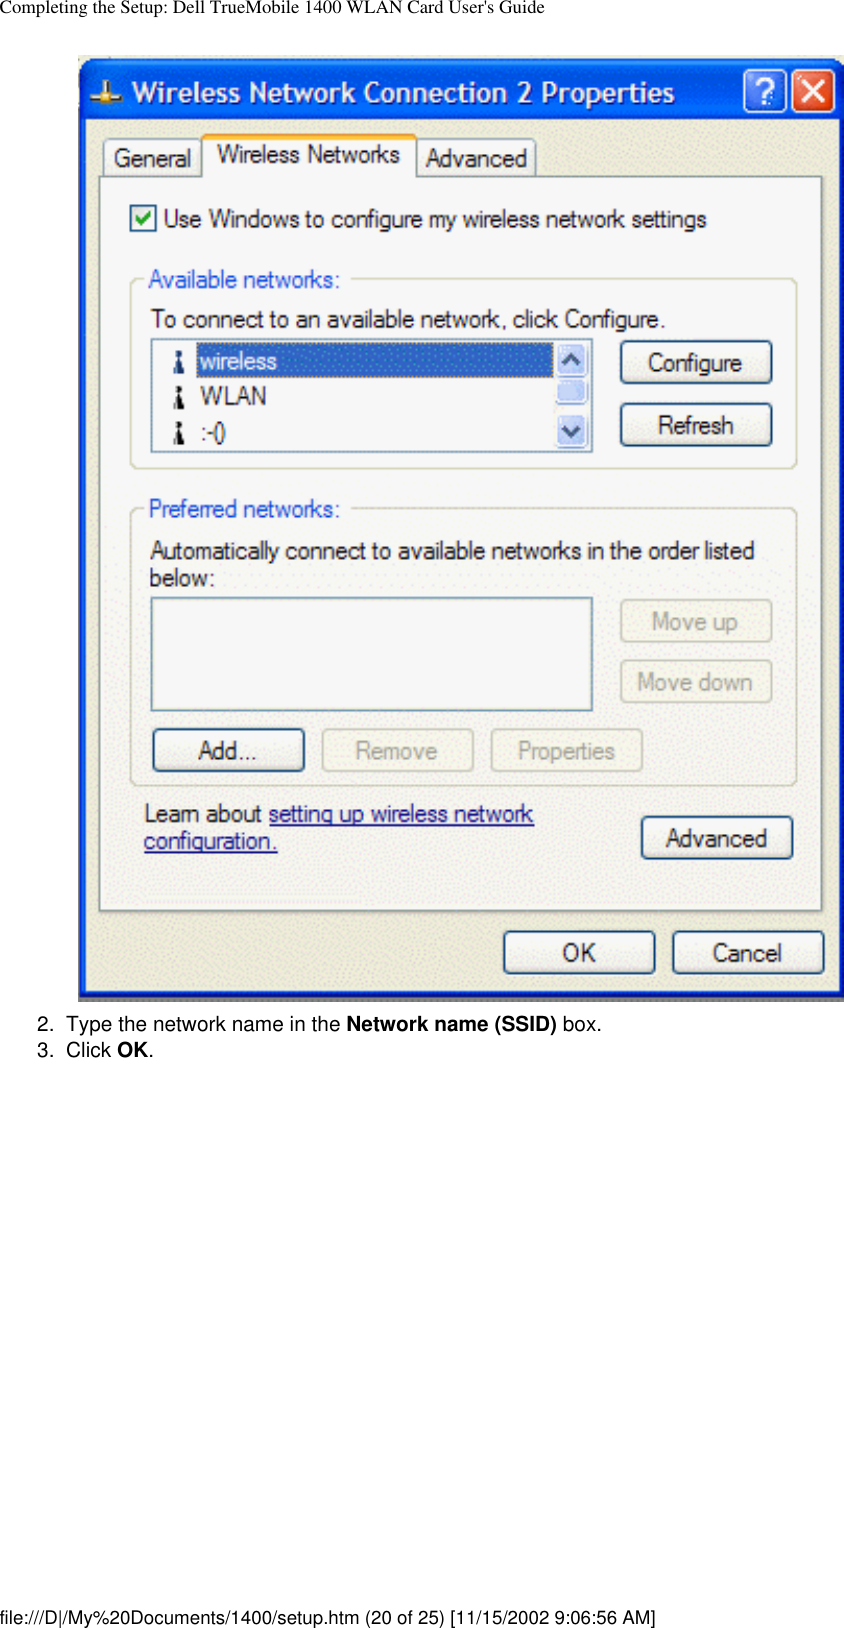 Completing the Setup: Dell TrueMobile 1400 WLAN Card User&apos;s Guide2.  Type the network name in the Network name (SSID) box.3.  Click OK. file:///D|/My%20Documents/1400/setup.htm (20 of 25) [11/15/2002 9:06:56 AM]